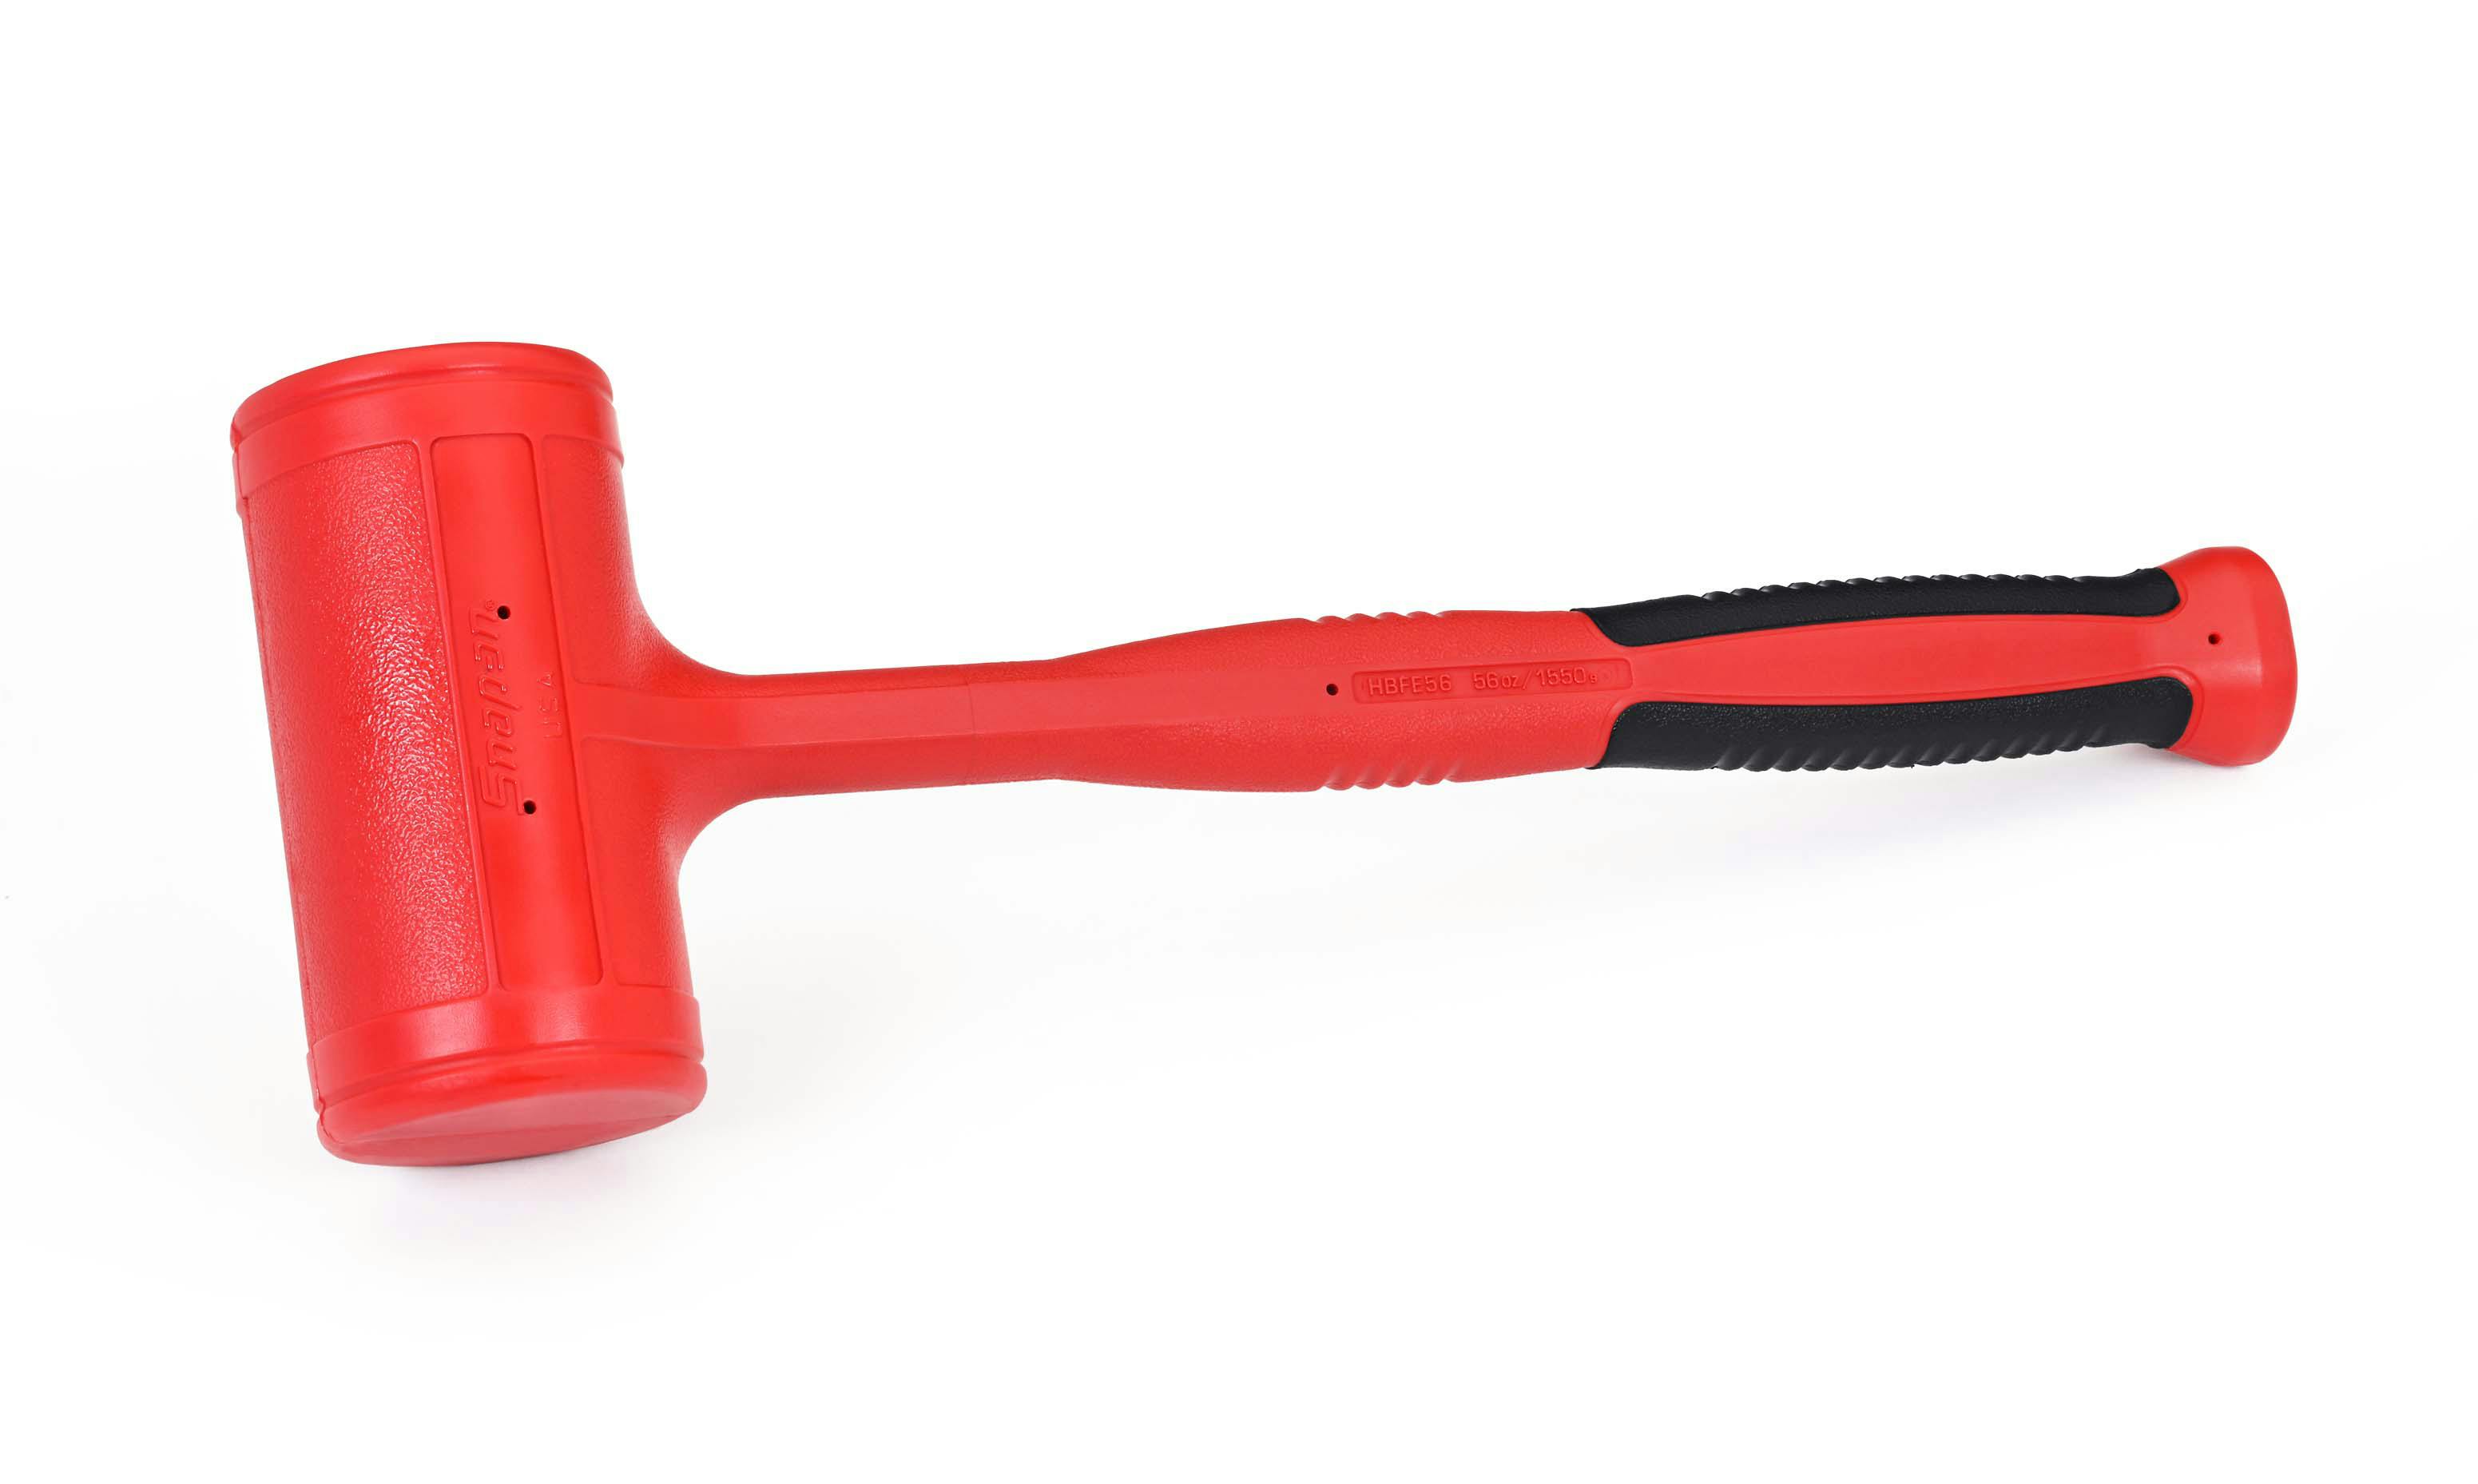 56 oz Soft Grip Dead Blow Hammer (Red) | HBFE56 | Snap-on Store